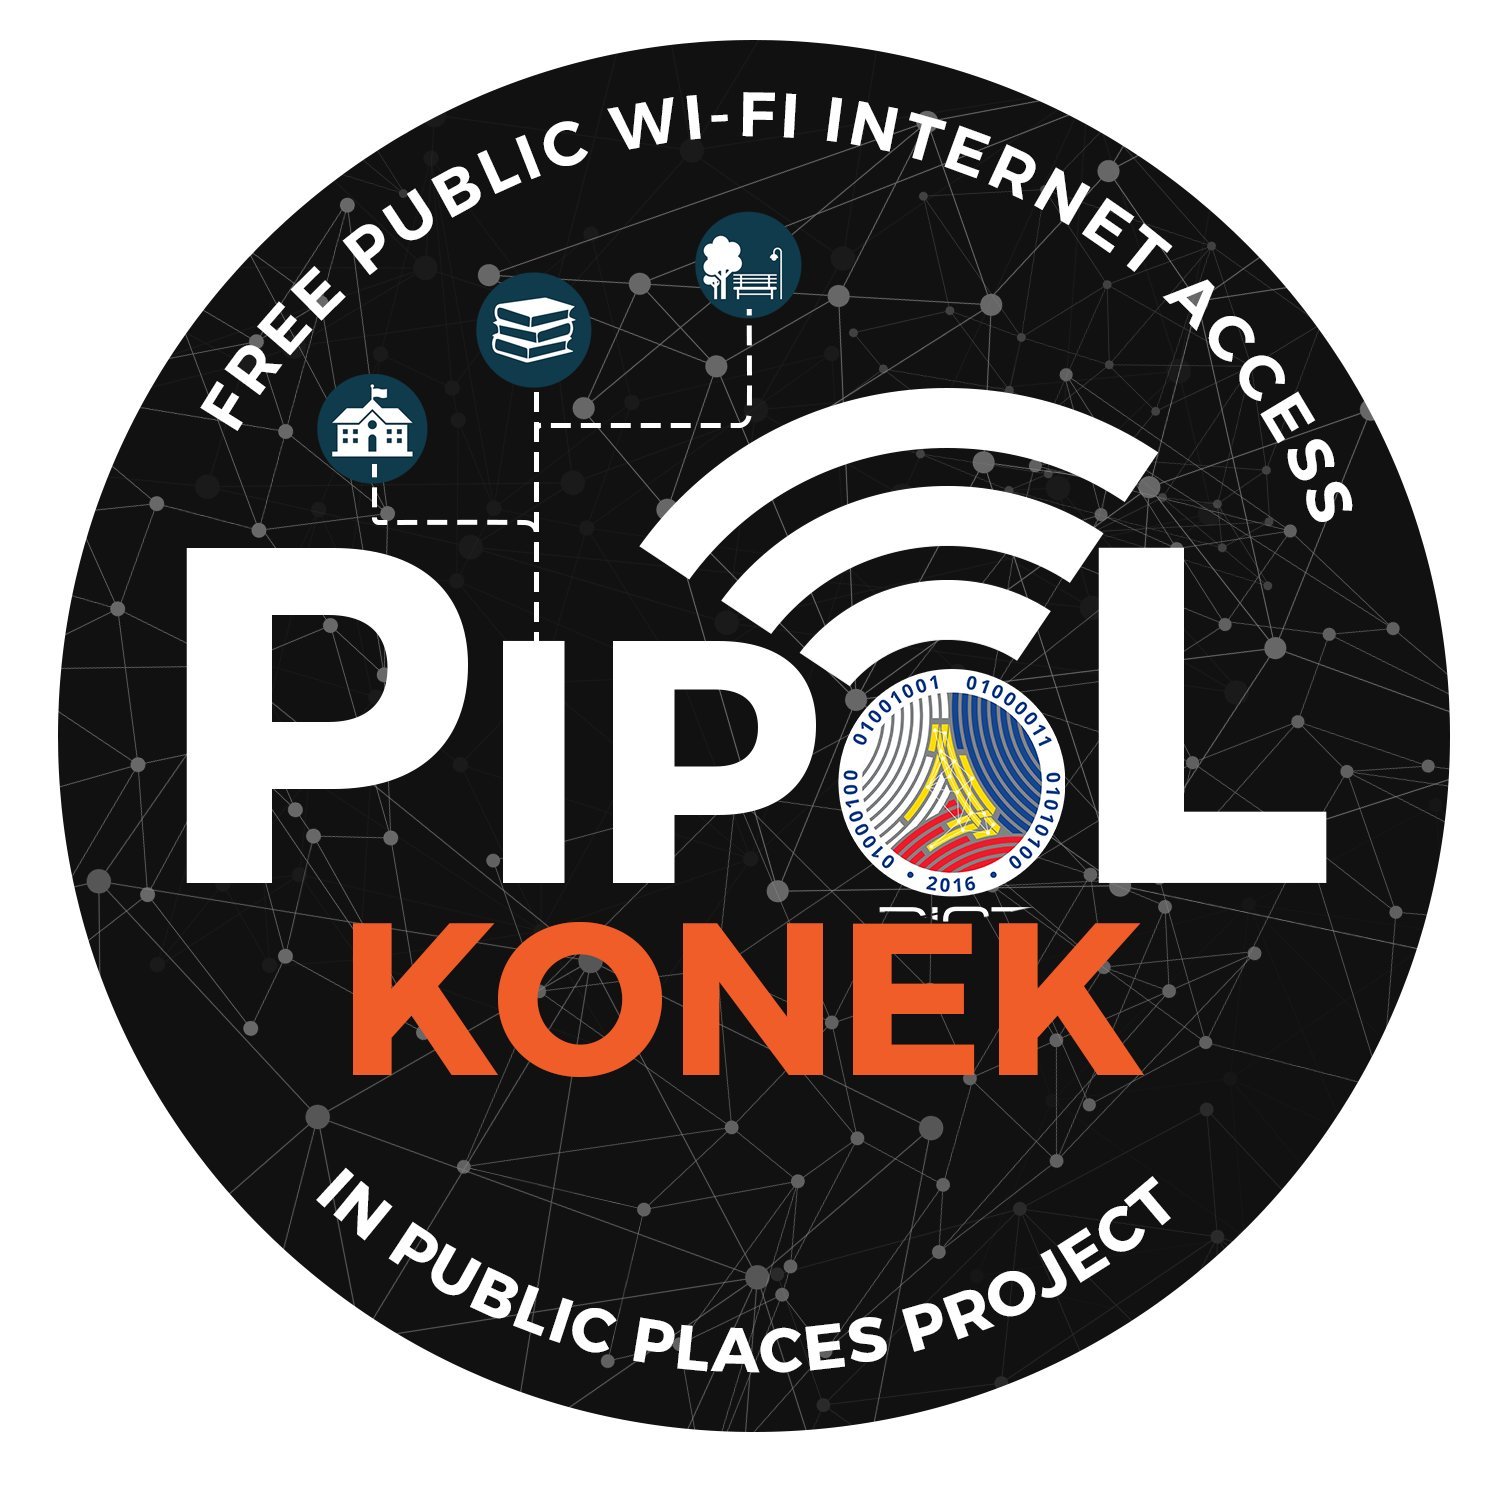 The Official account of Free Wi-Fi Internet Access in Public Places Project of Luzon Cluster 2